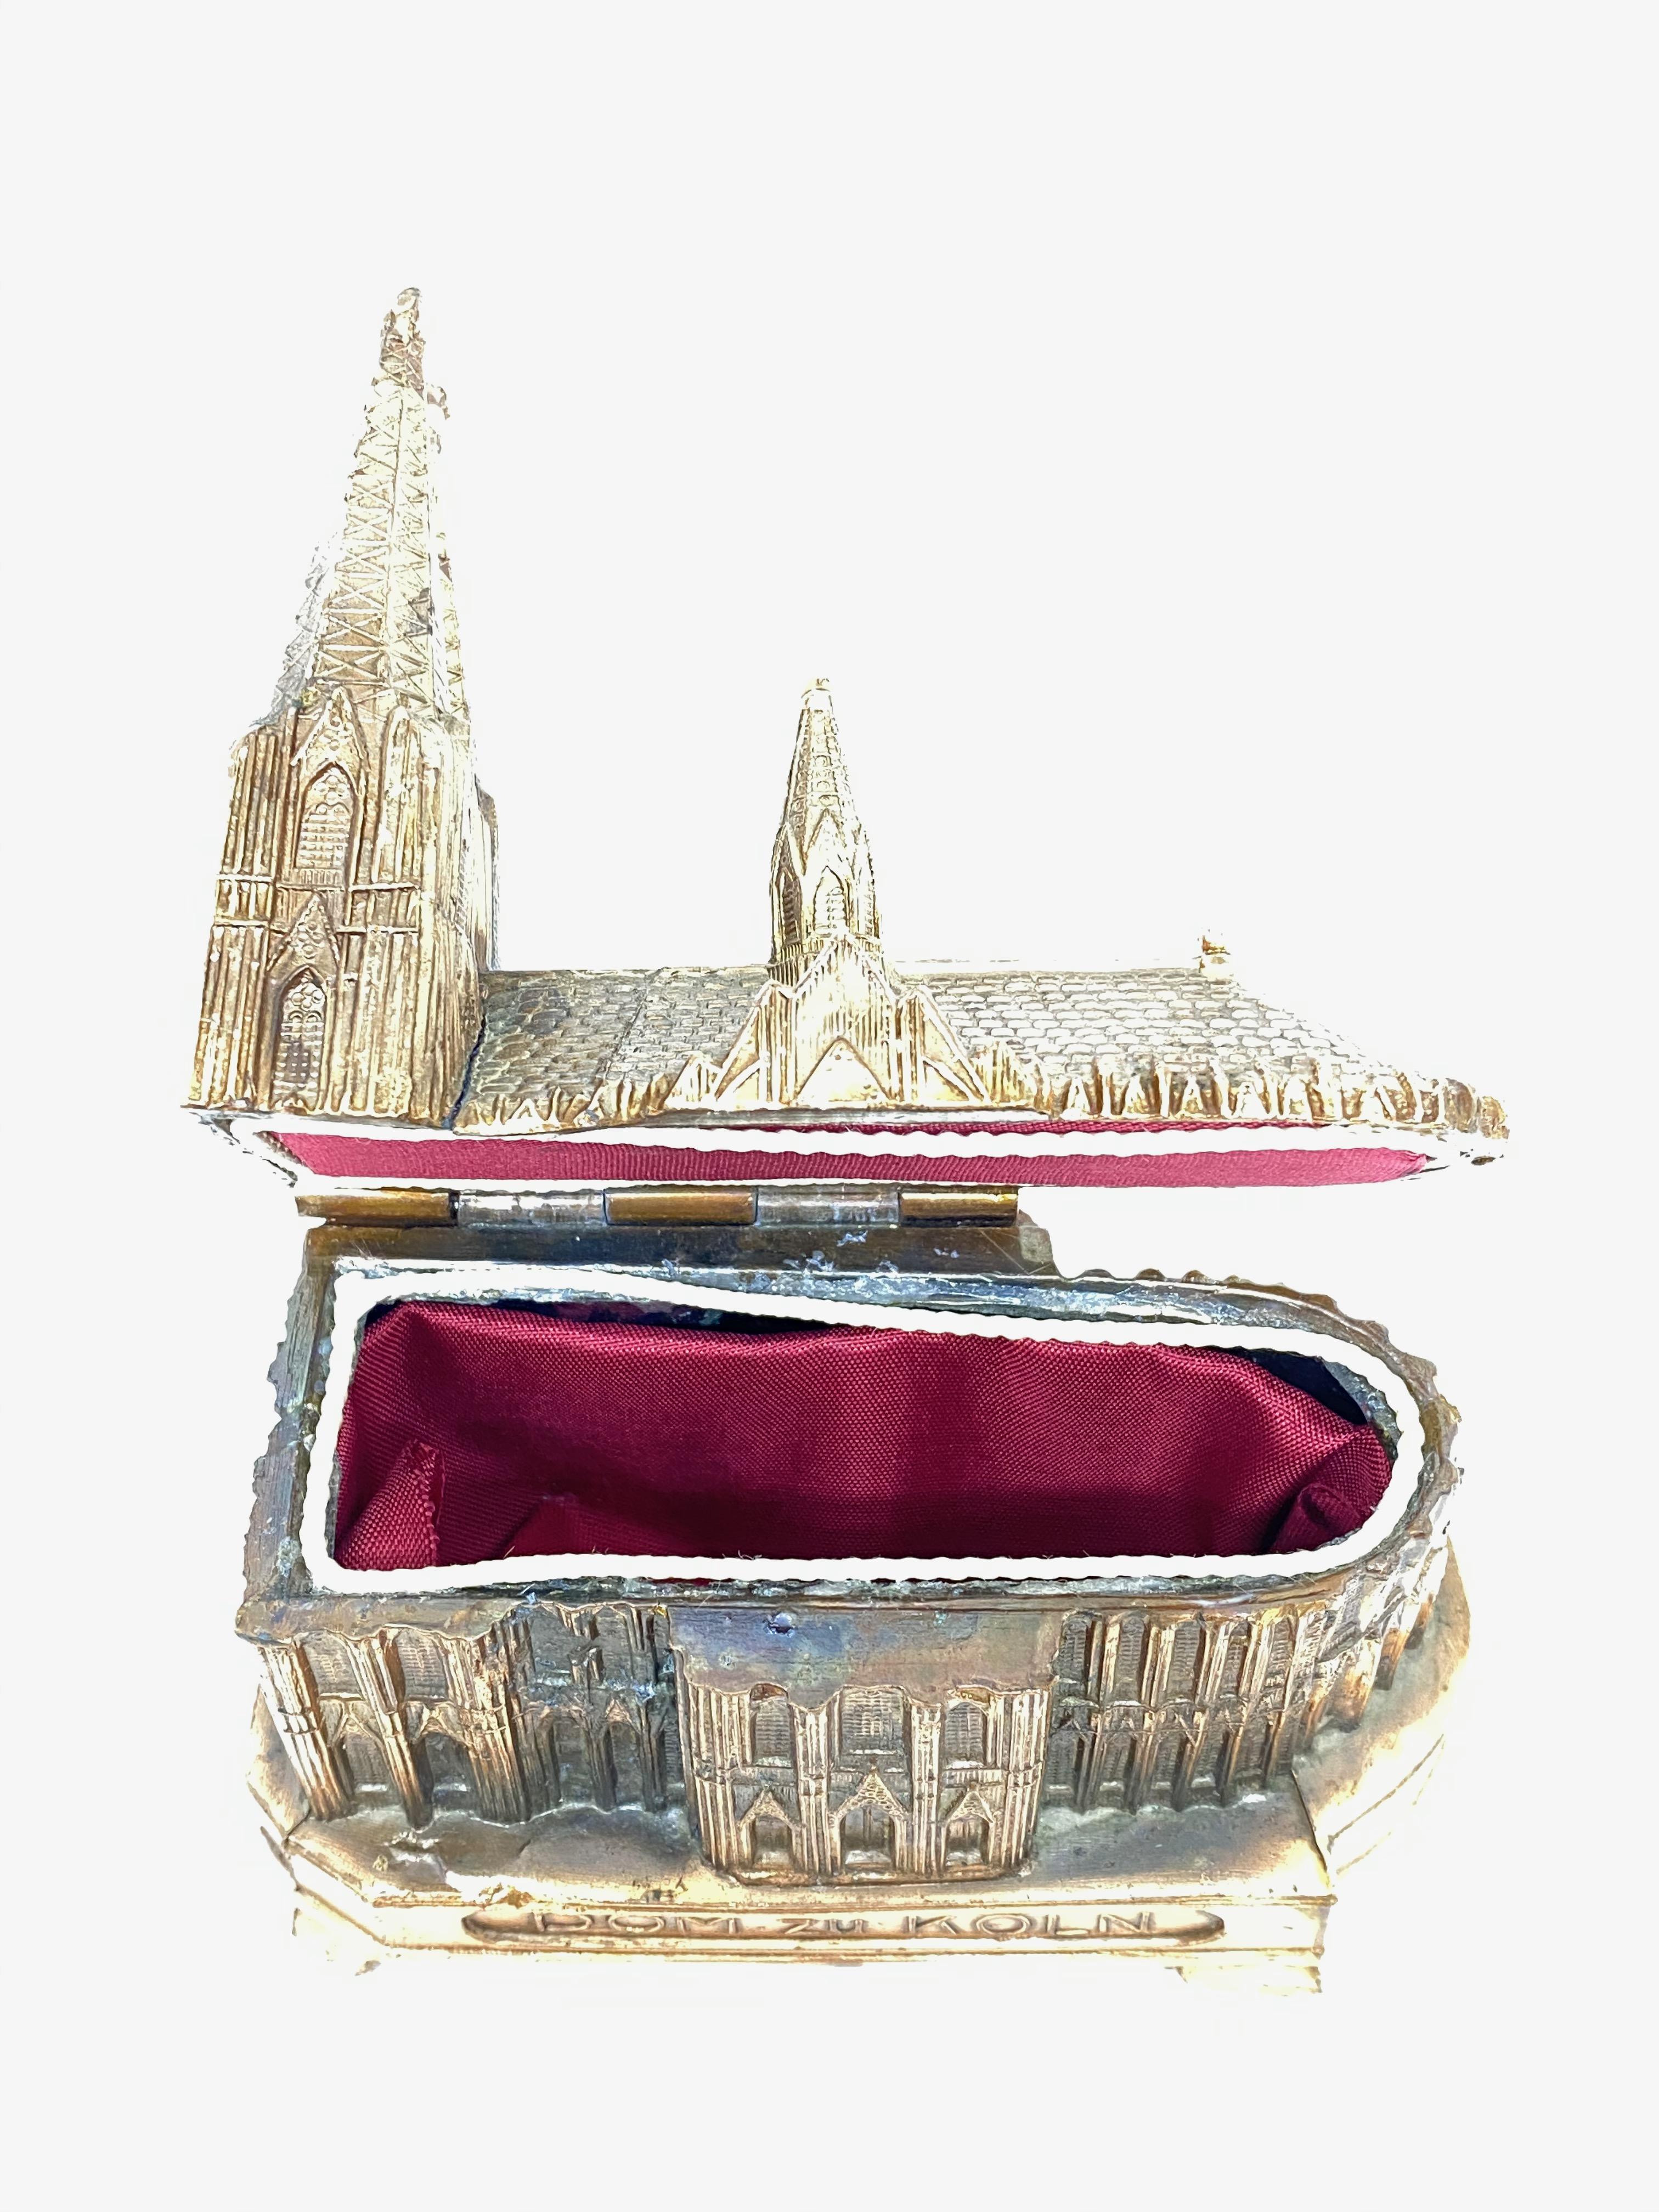 Cologne Cathedral Jewelry Trinket Box Metal, Antique German Souvenir, 1930s In Good Condition For Sale In Nuernberg, DE